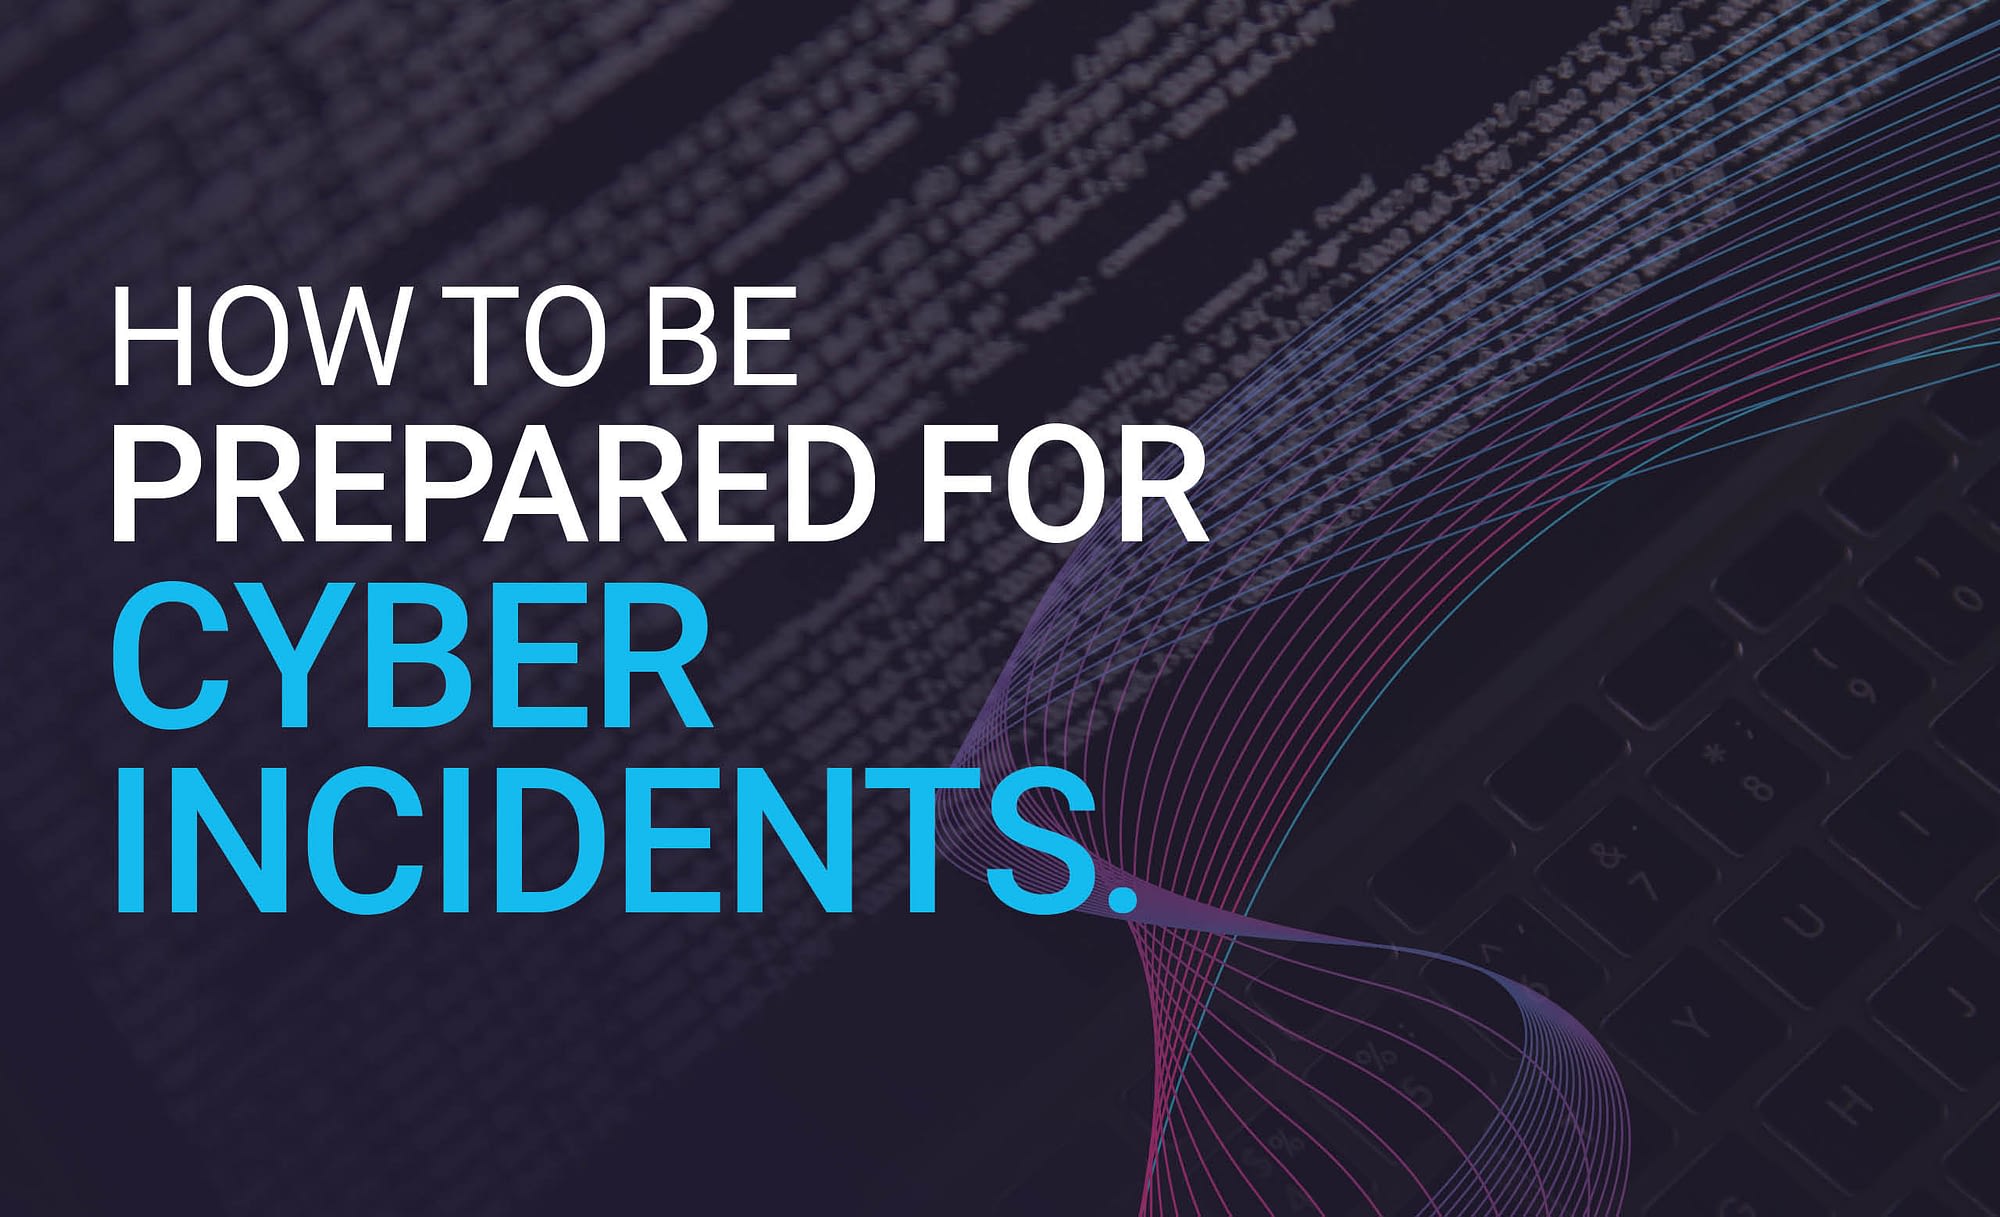 Do you want to know how to be ready for cyber incidents?